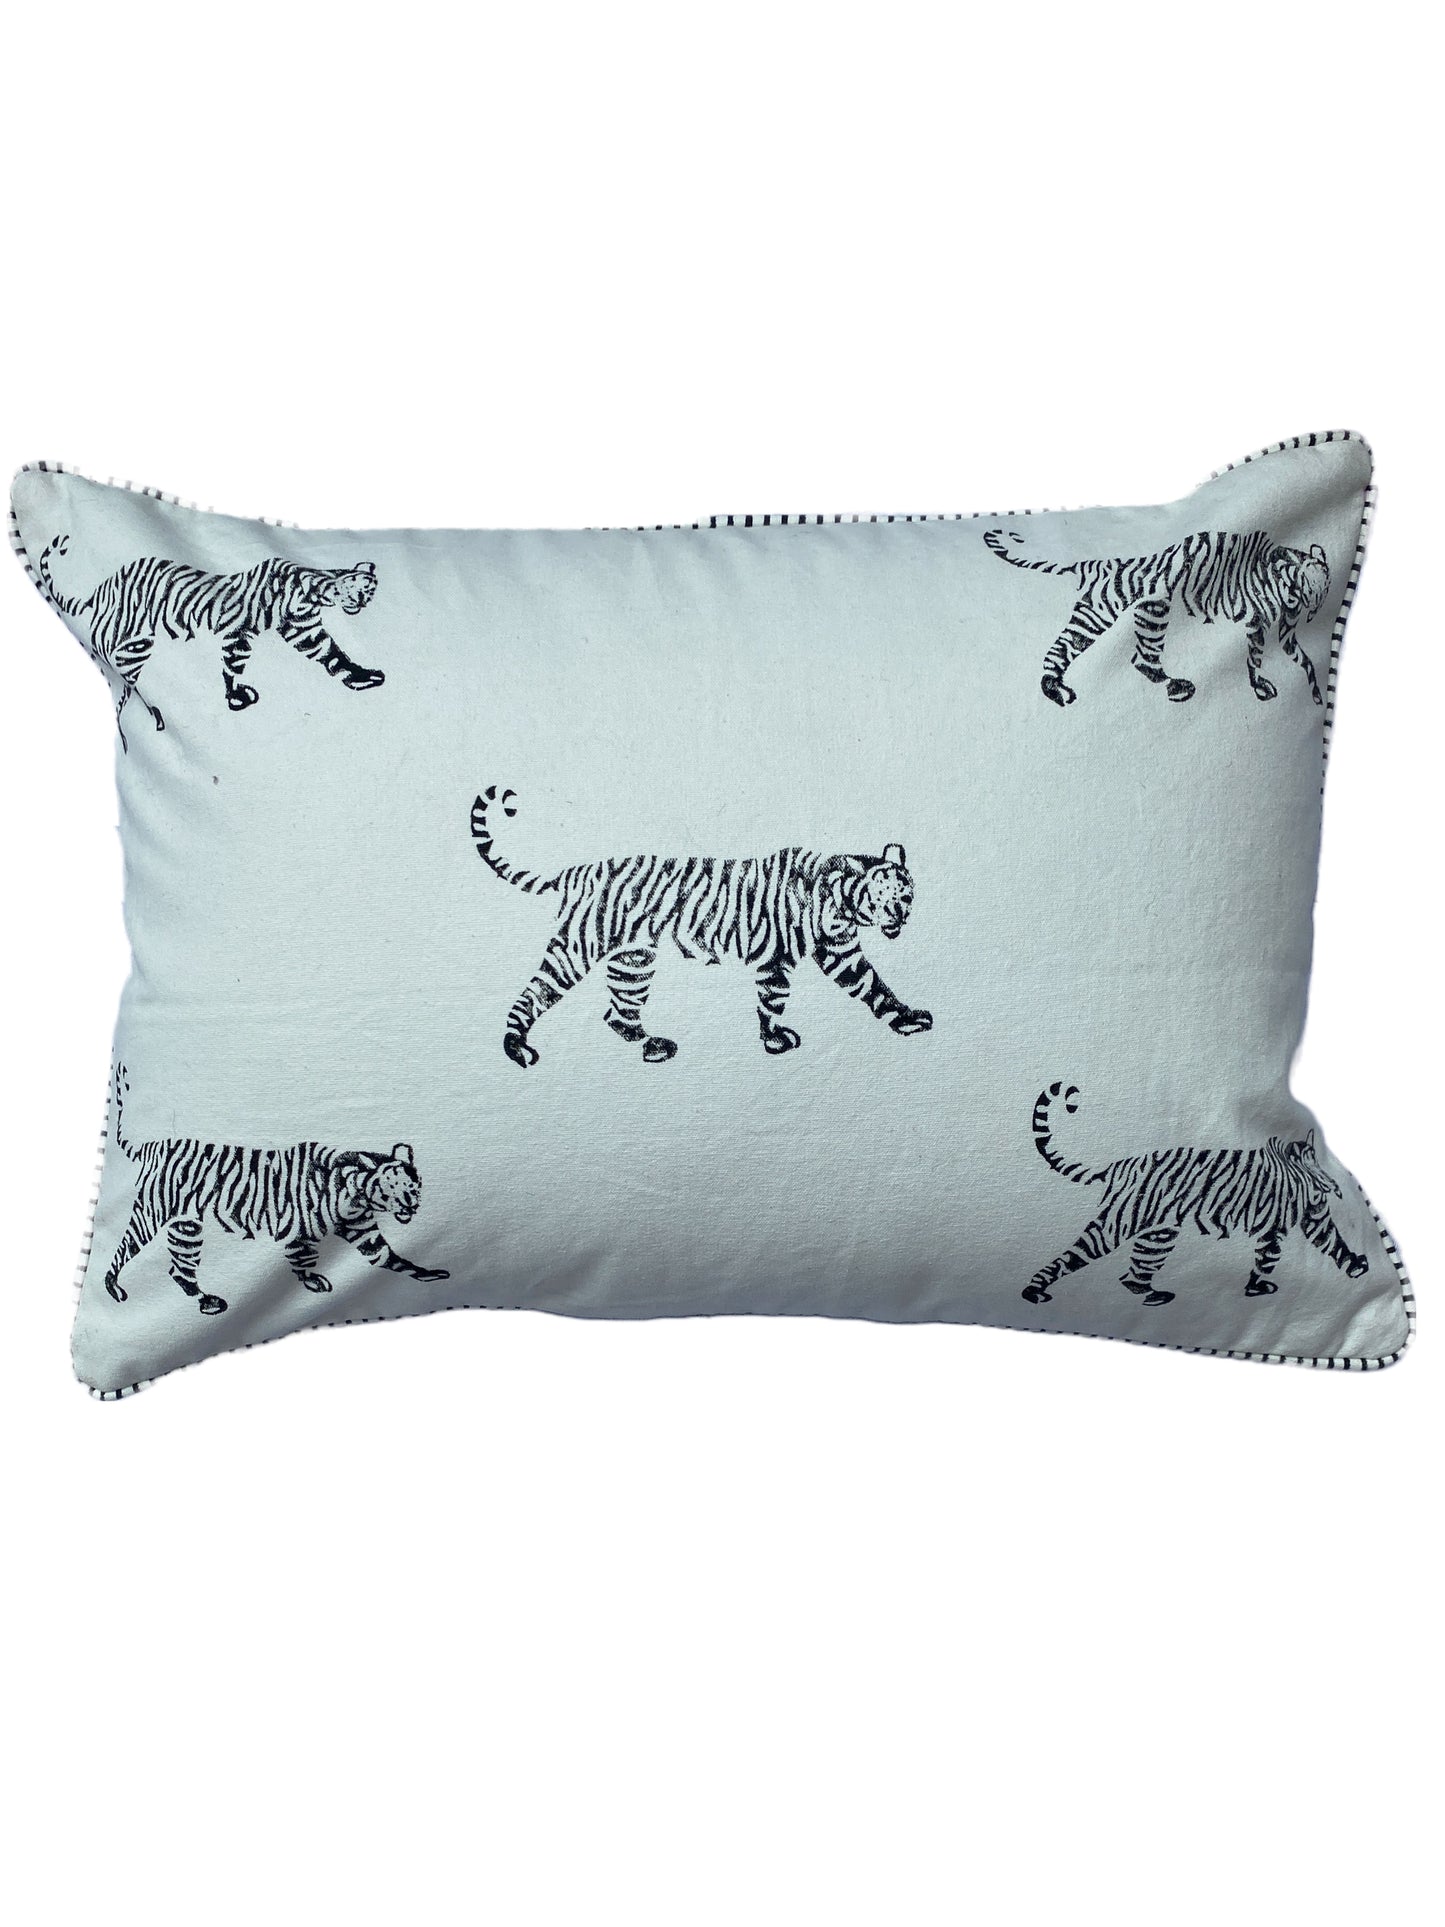 TIGER CUSHION - BLACK AND WHITE